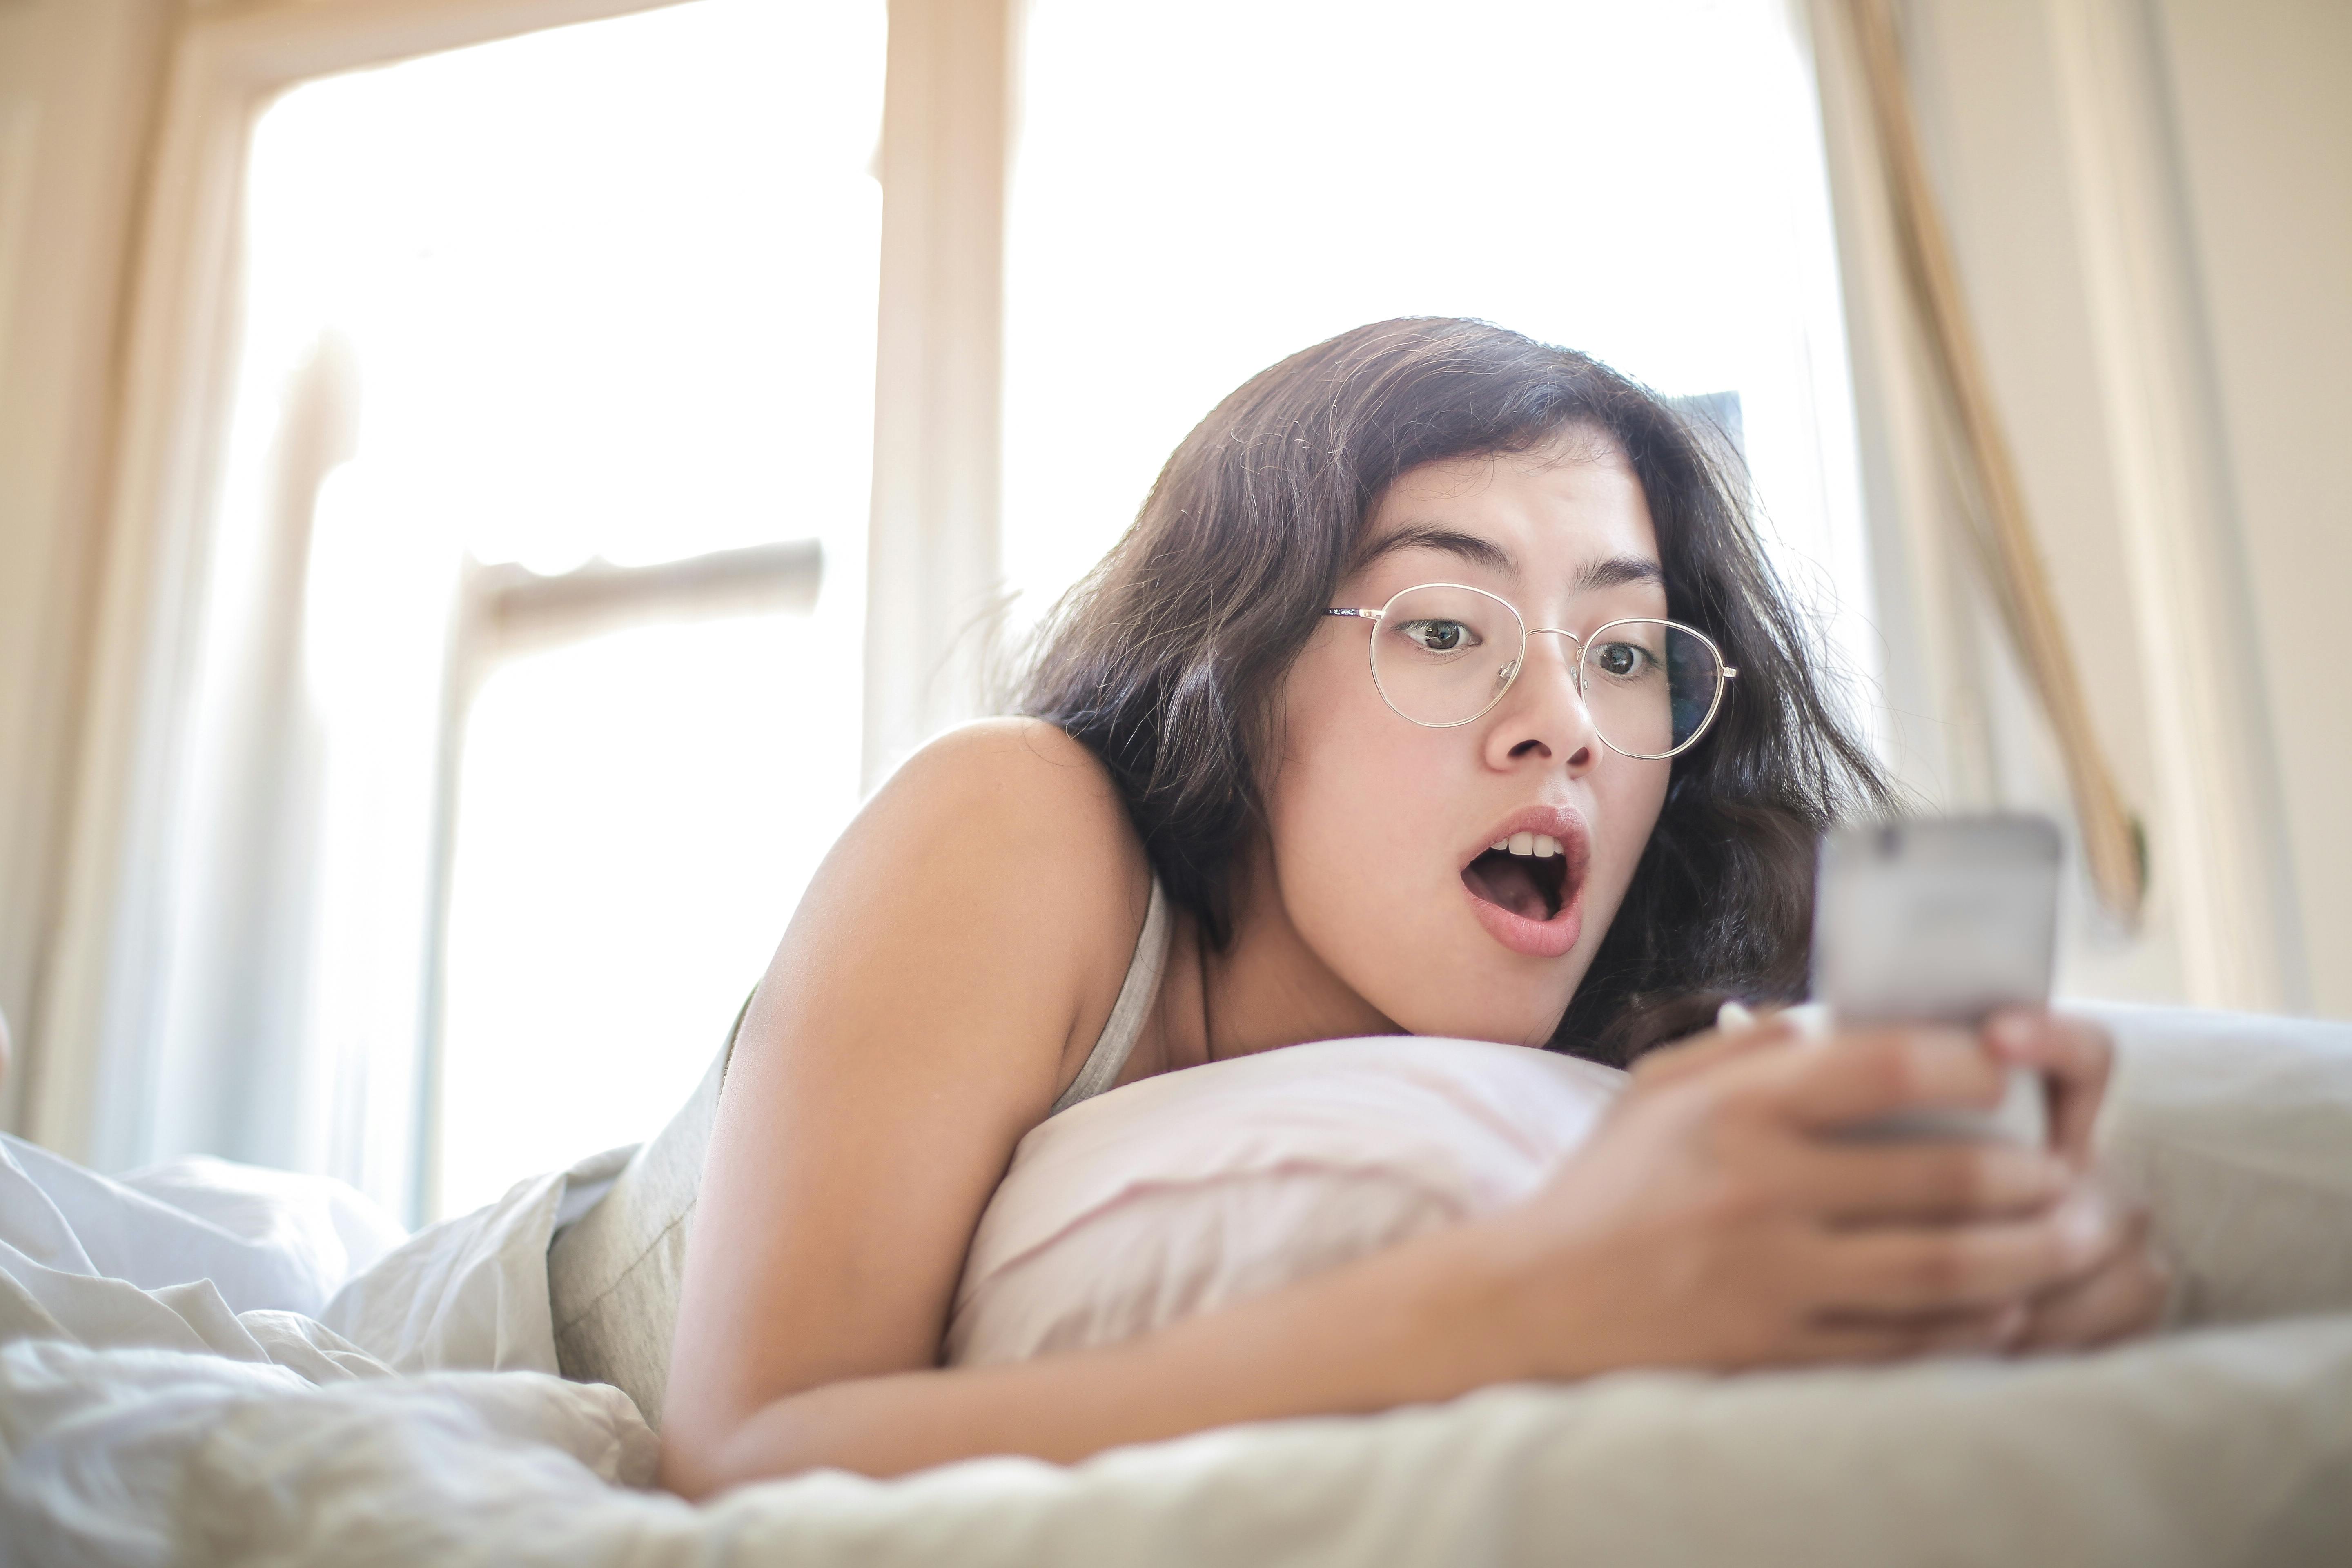 A shocked woman lying on a bed holding and looking at a phone | Source: Pexels